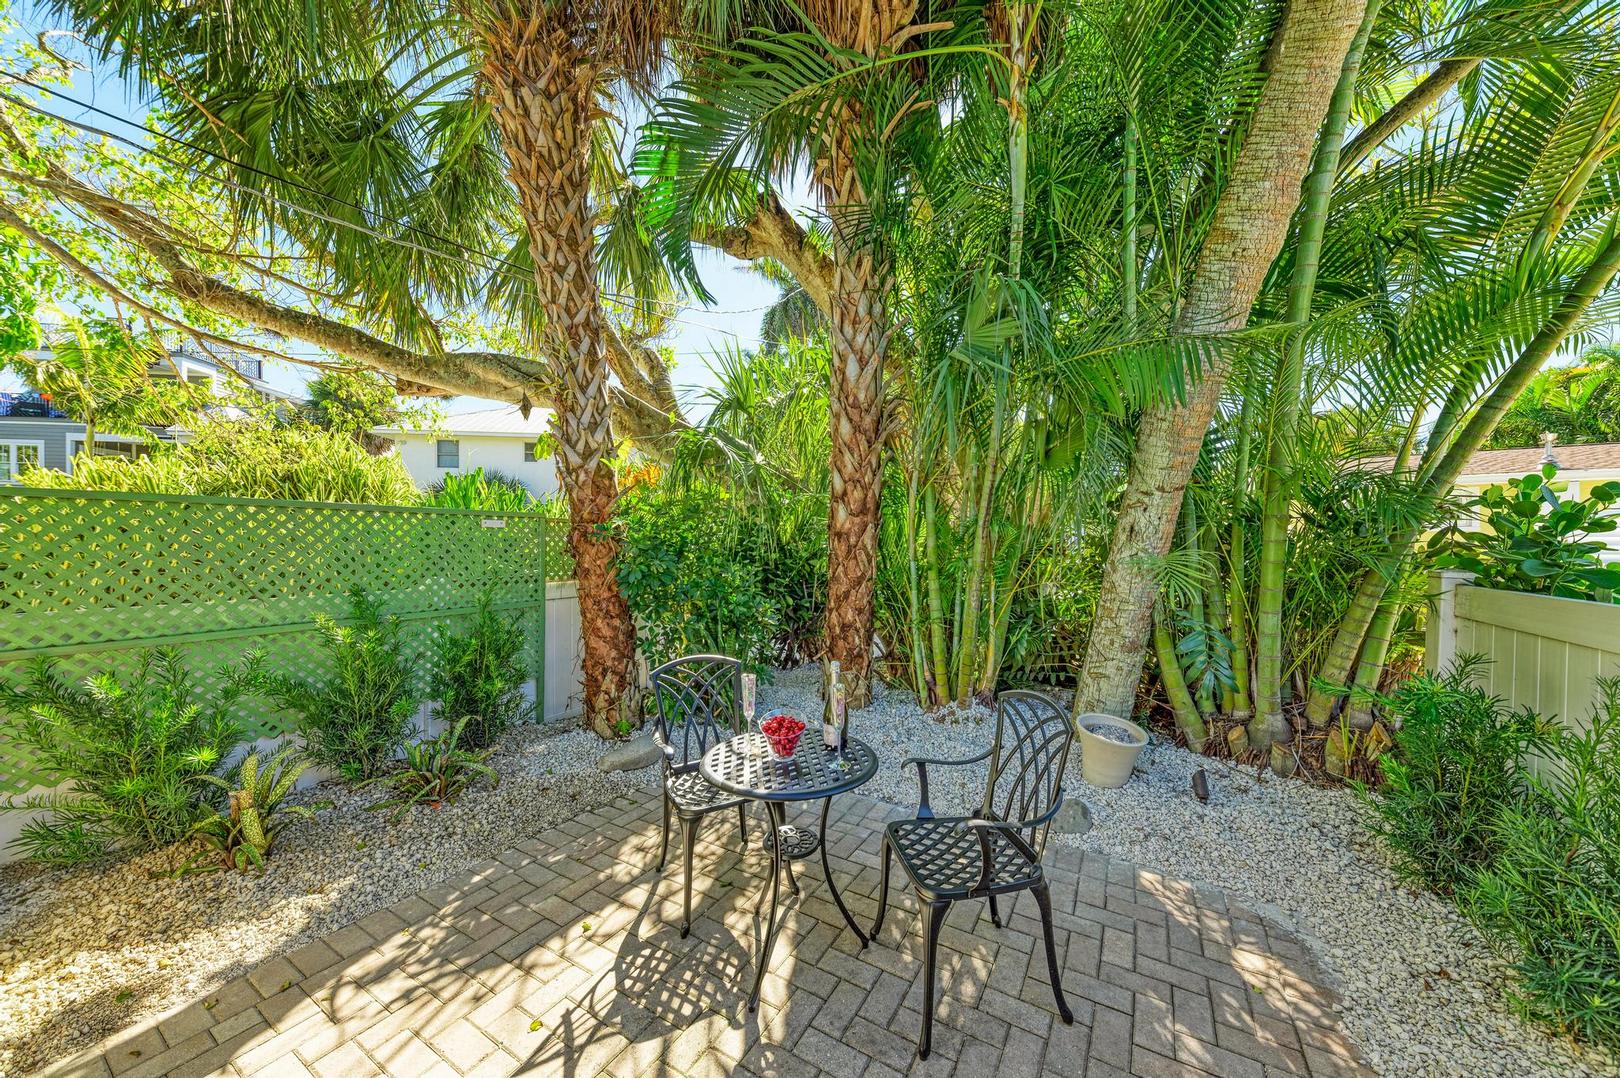 Turtle Tyme paver patio with bistro table and two chairs under trees